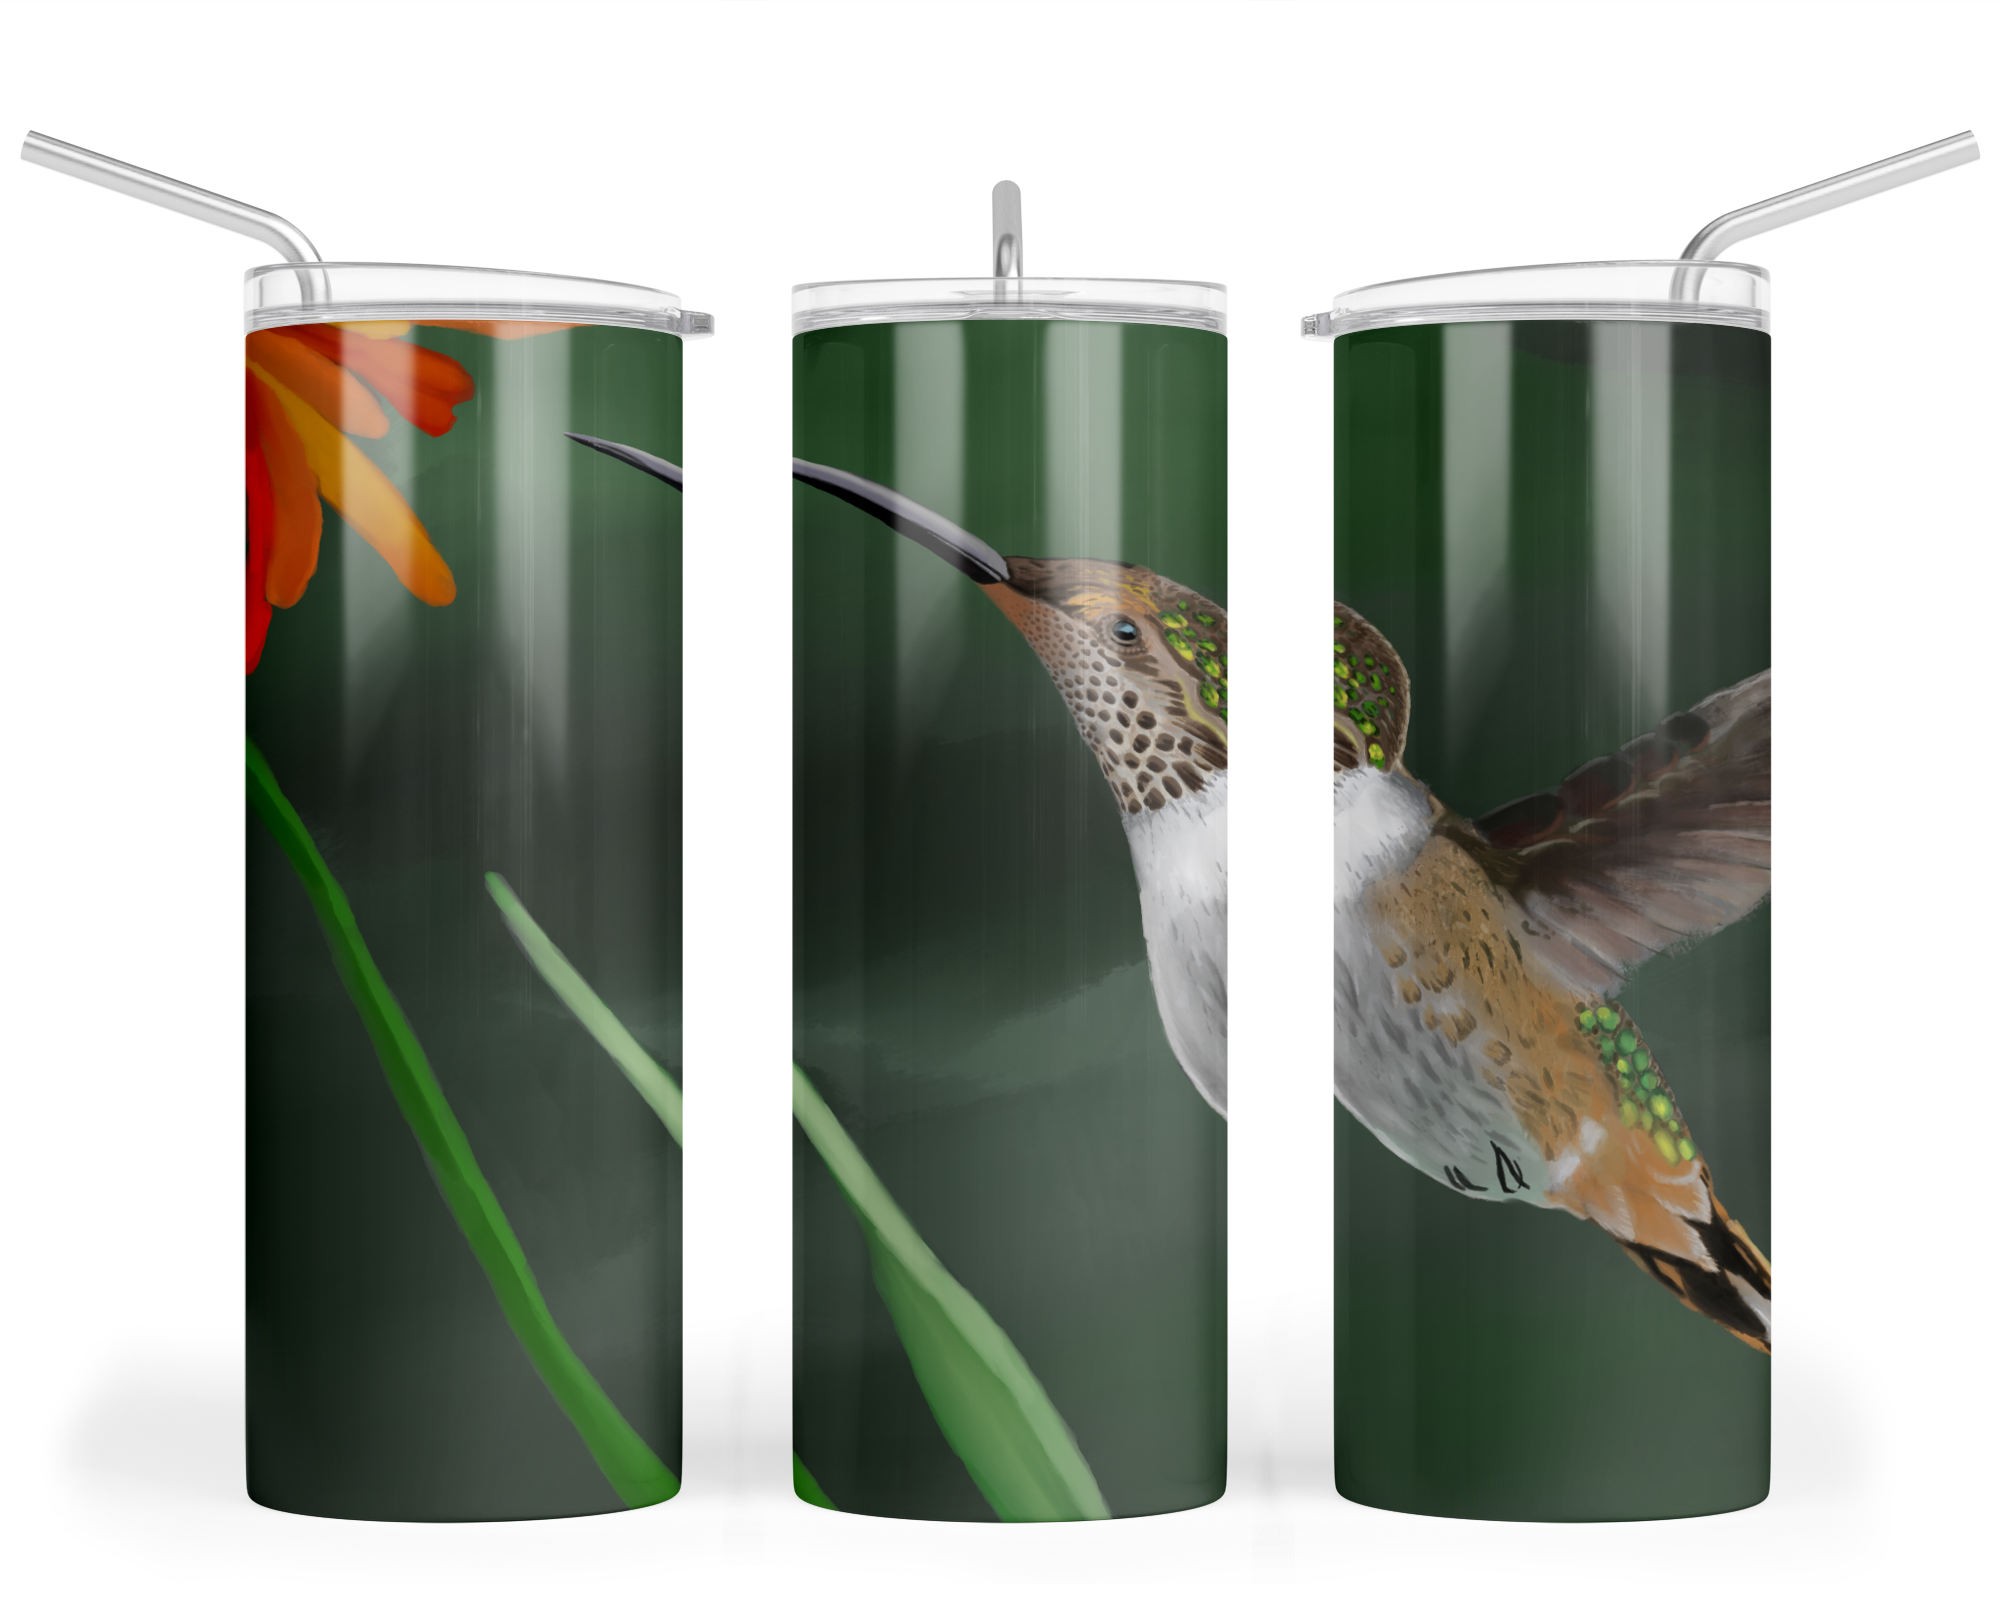 "Simply Buzzing with Anticipation" - Stainless Steel Tumbler